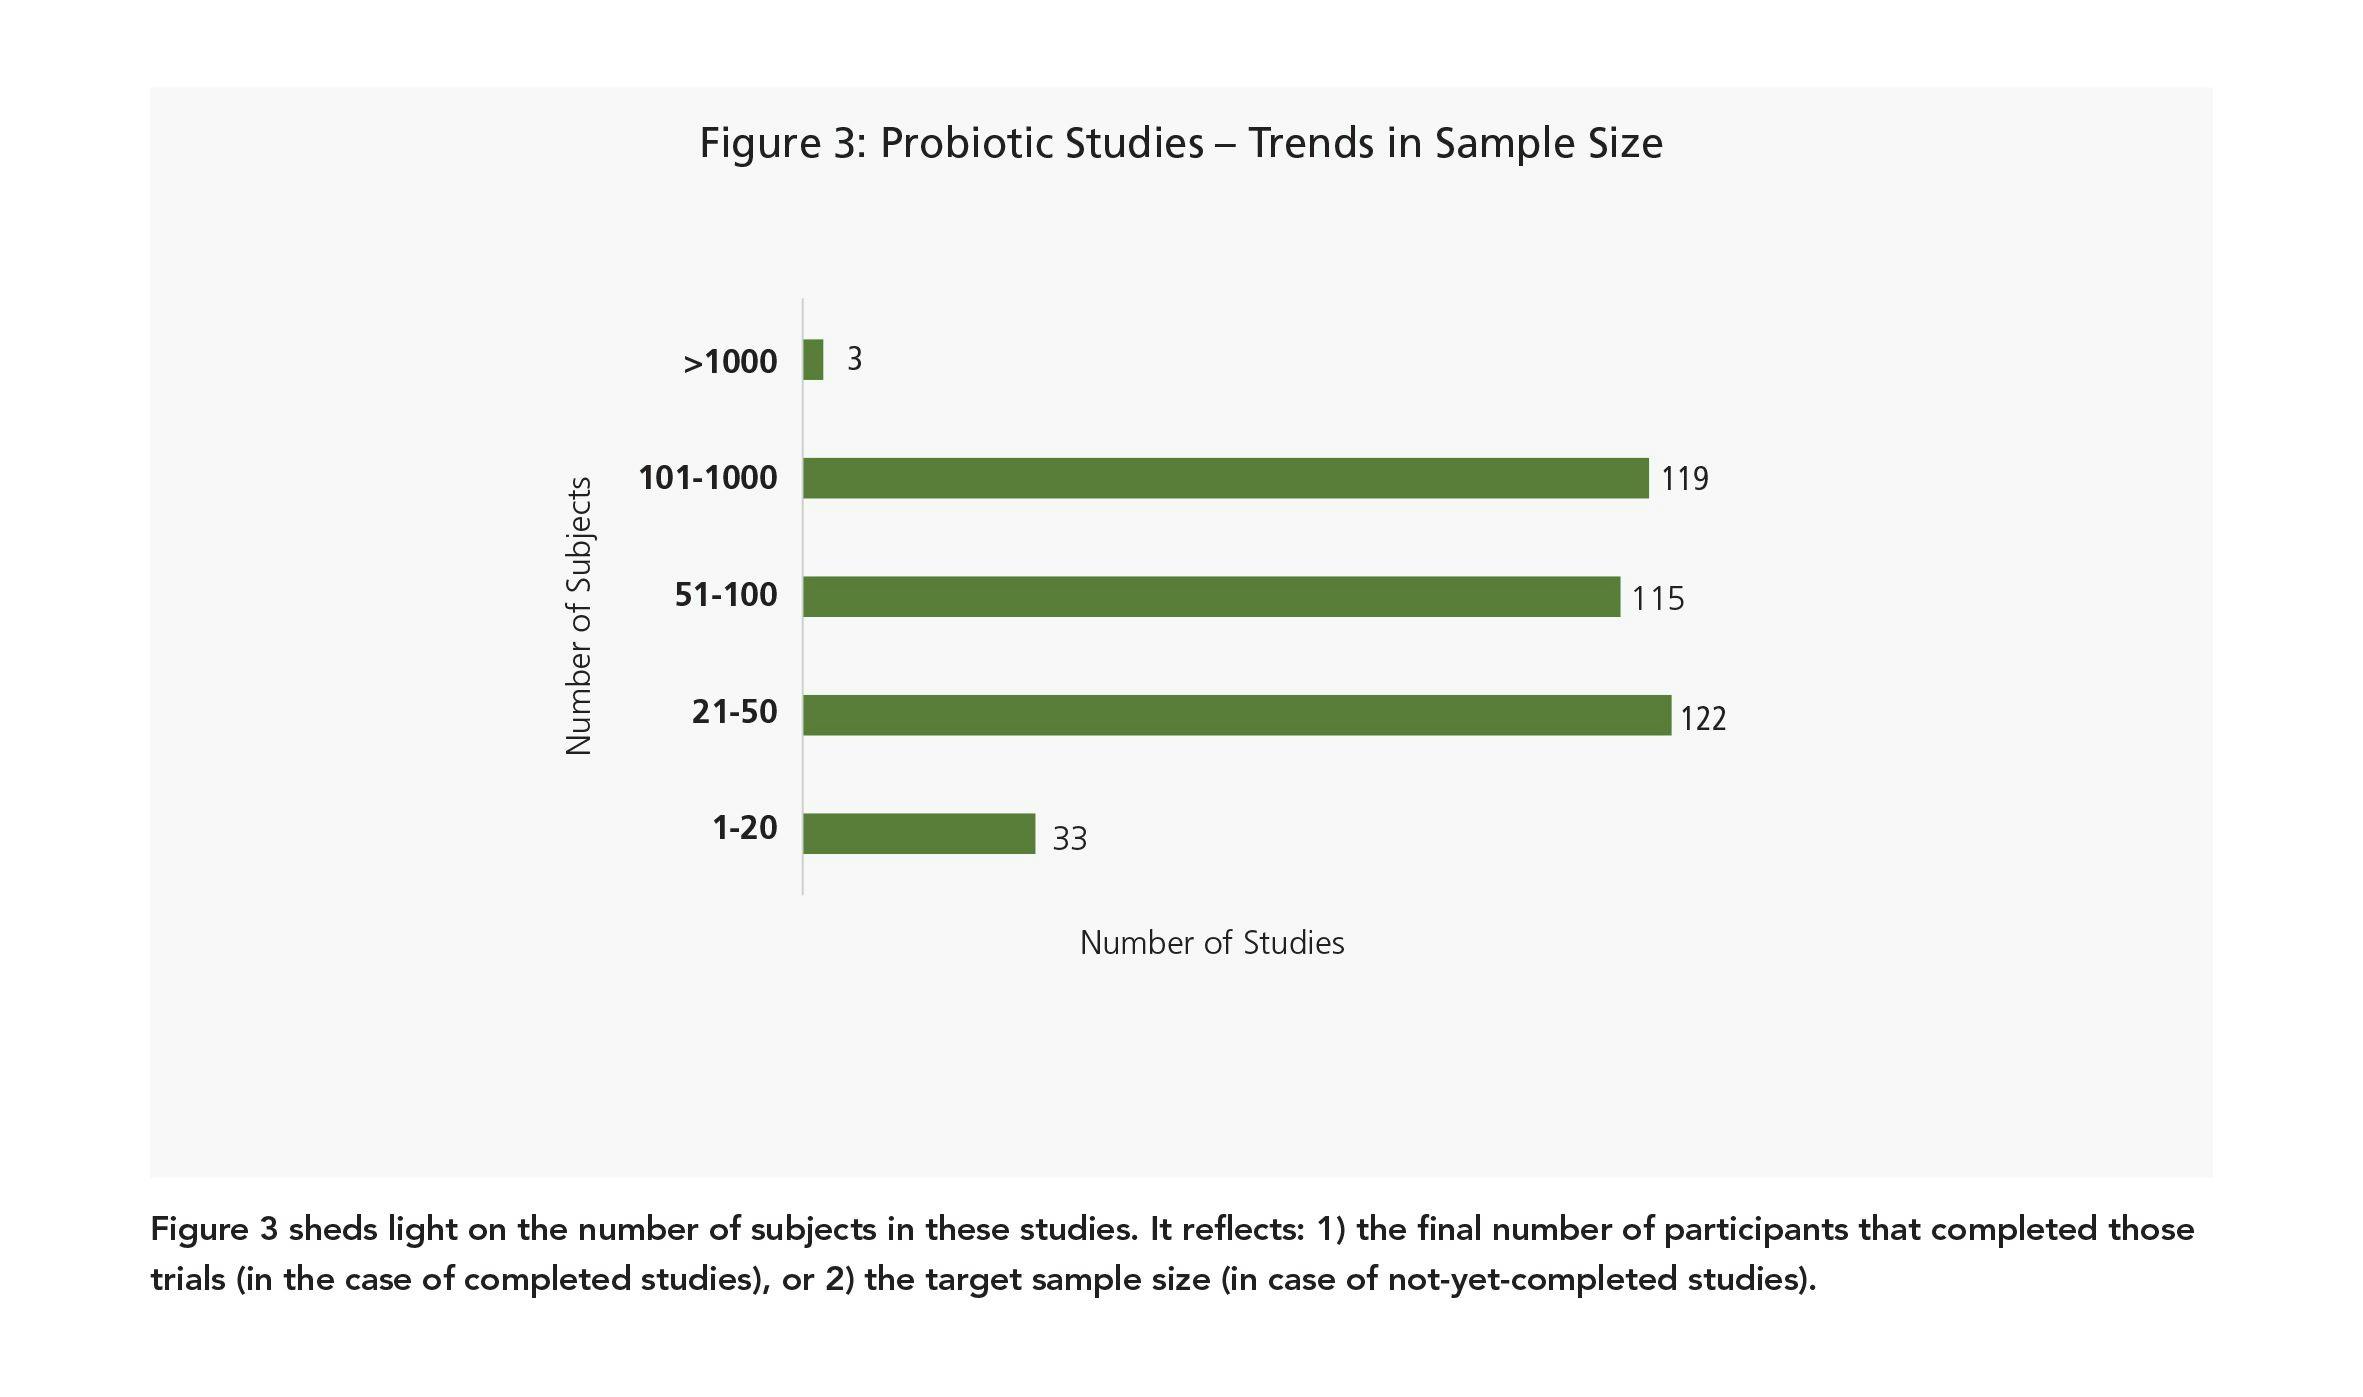 Figure 3 sheds light on the number of subjects in these studies. It reflects: 1) the final number of participants that completed those trials (in the case of completed studies), or 2) the target sample size (in case of not-yet-completed studies).